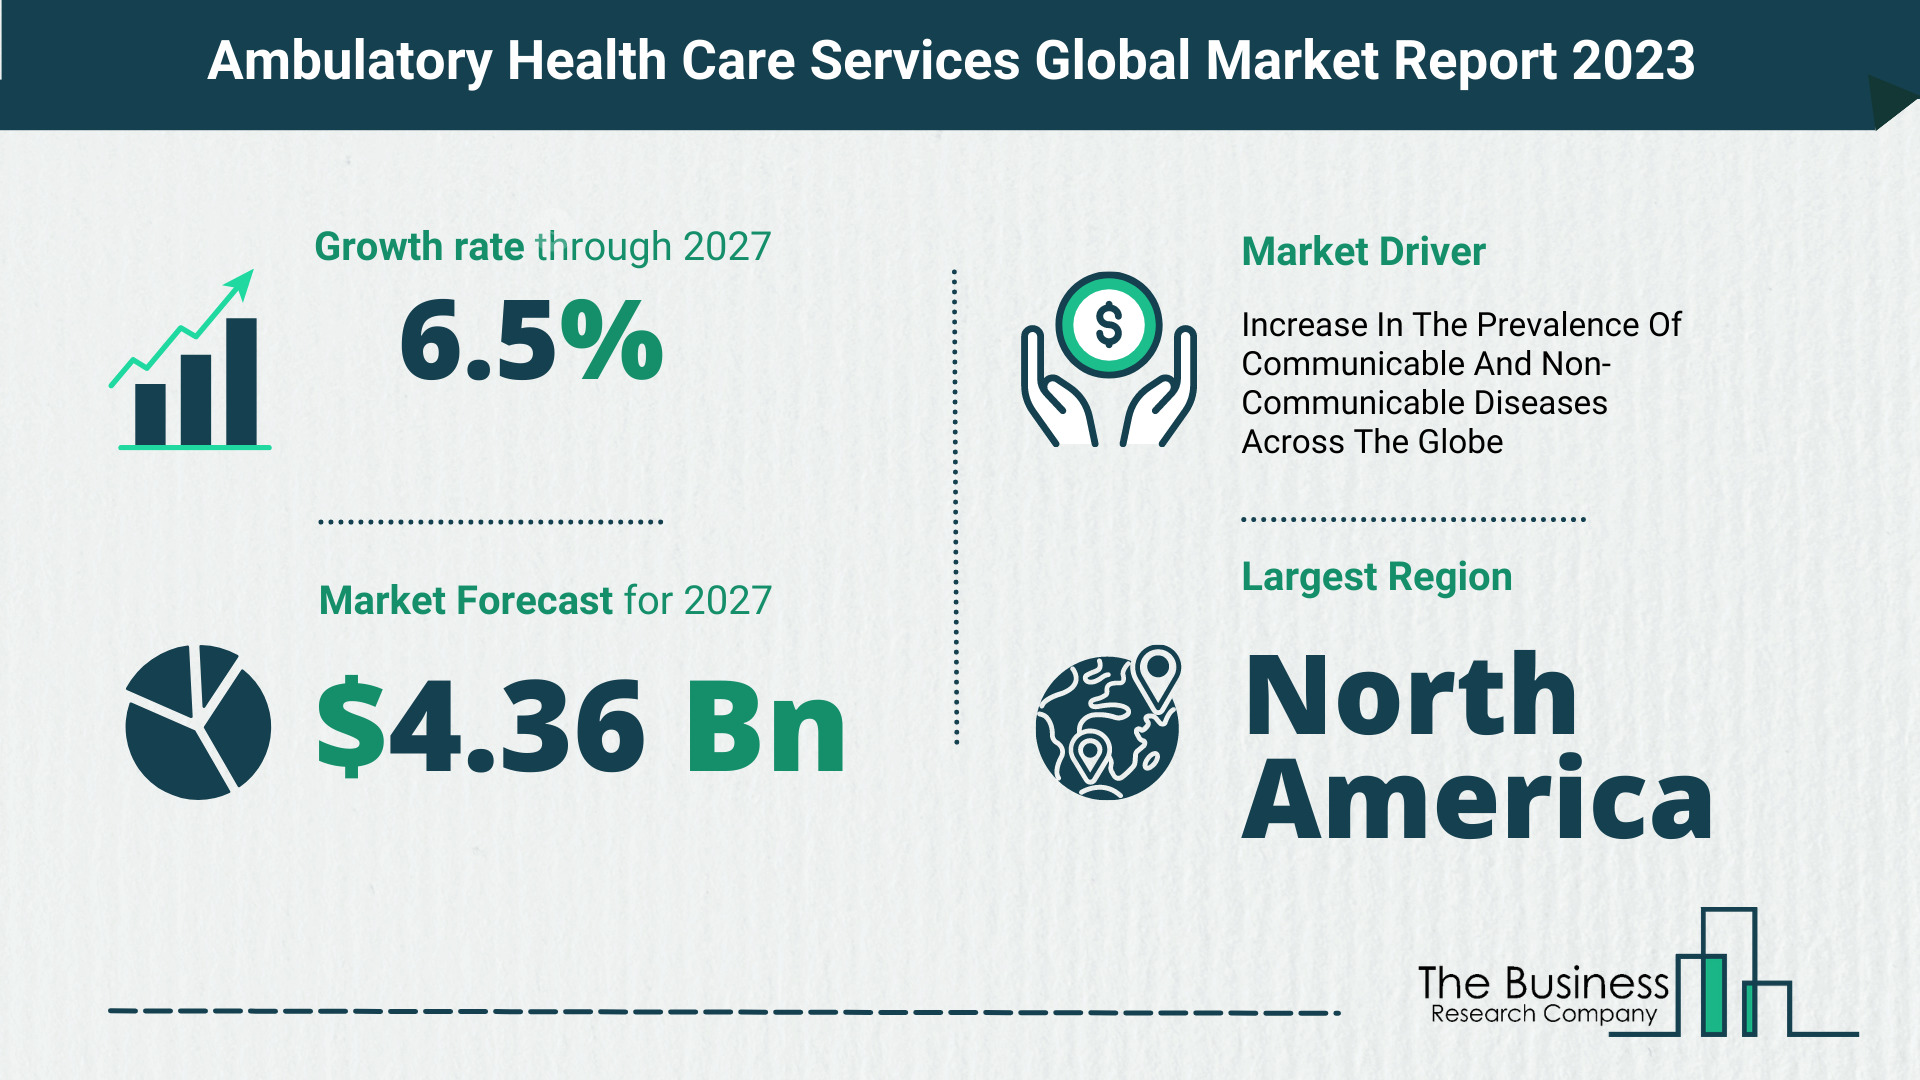 Ambulatory Health Care Services Market Size, Share, And Growth Rate Analysis 2023